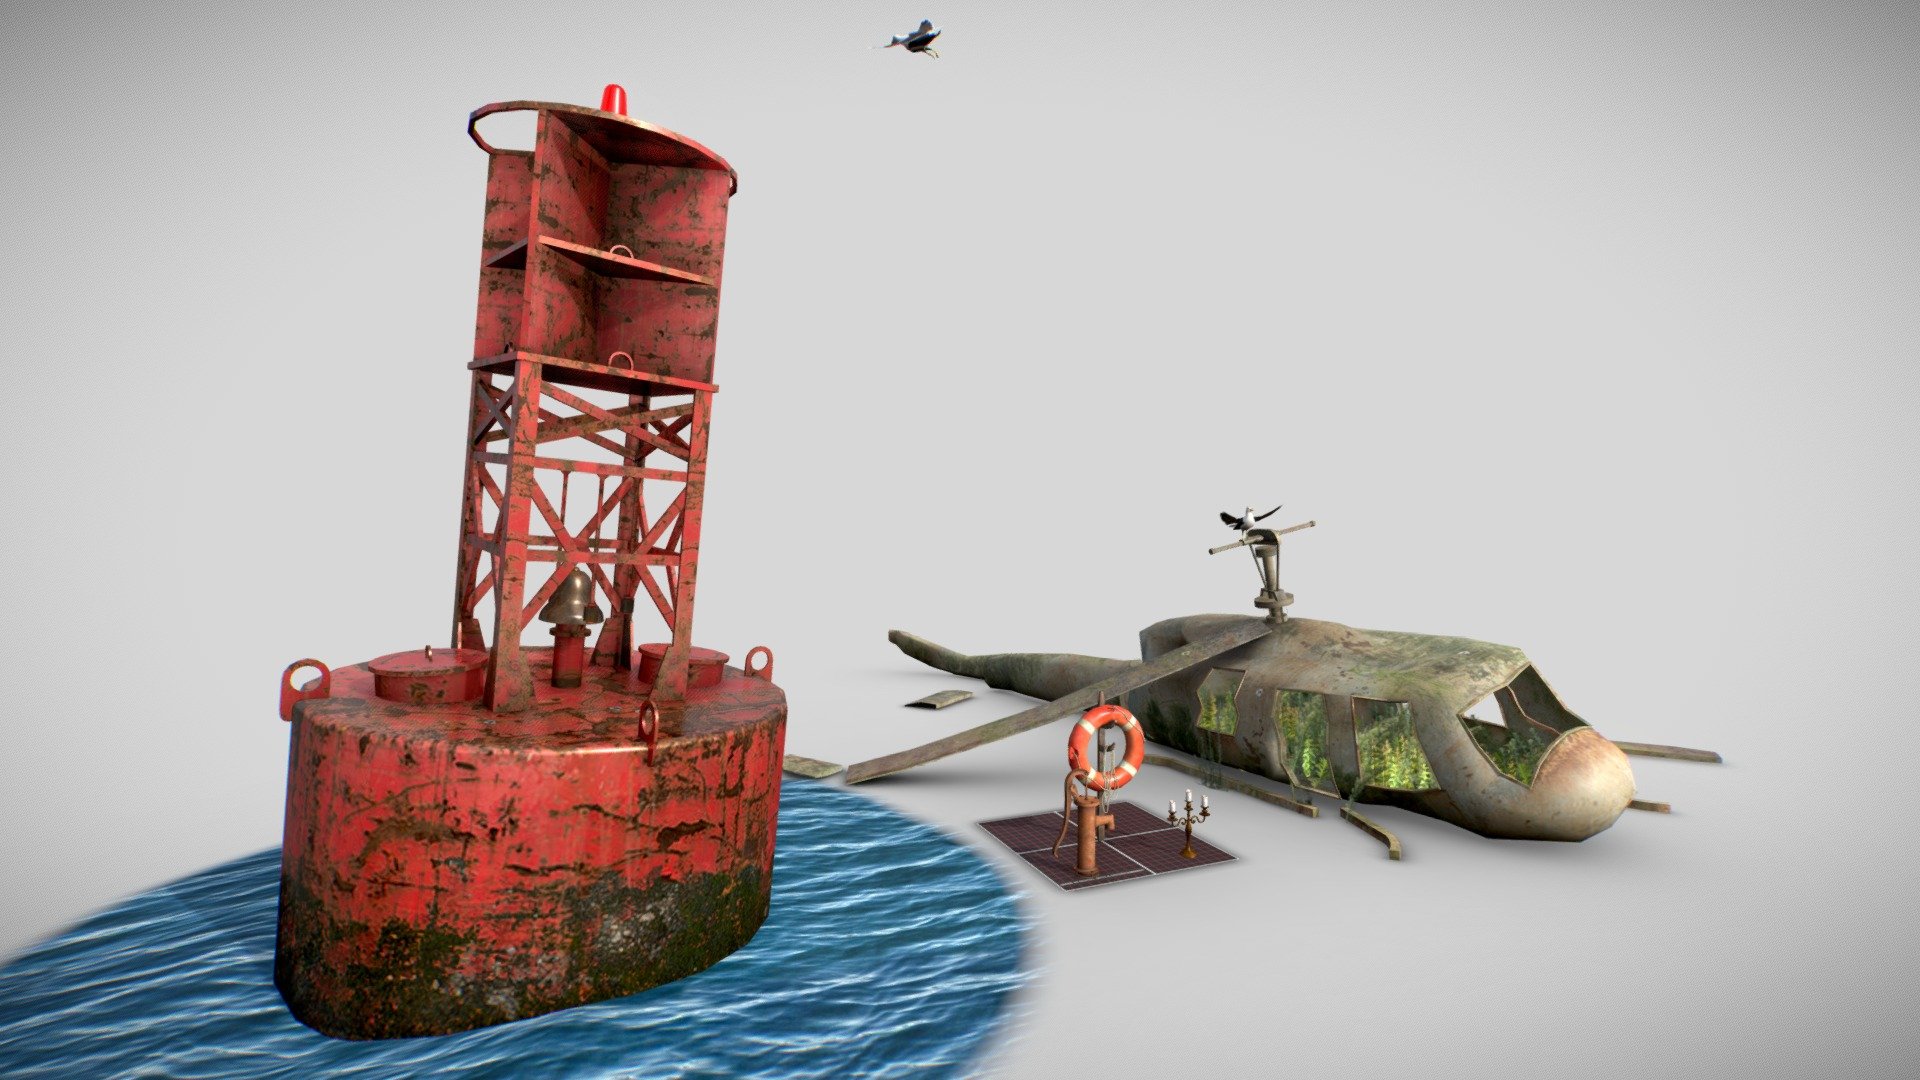 Bram Gunst 1VFX08 Digital Arts And Entertainment Kortrijk

Hard Props SM_Bell_Bouy SM_Helicopter

Simple Props SM_Waterpump SM_Lifebuoy SM_Candle-holder SM_Seagull SM_Plants - DAE 5 Finished Props - By The Ocean - 3D model by Bram Gunst (@BramGunst) 3d model